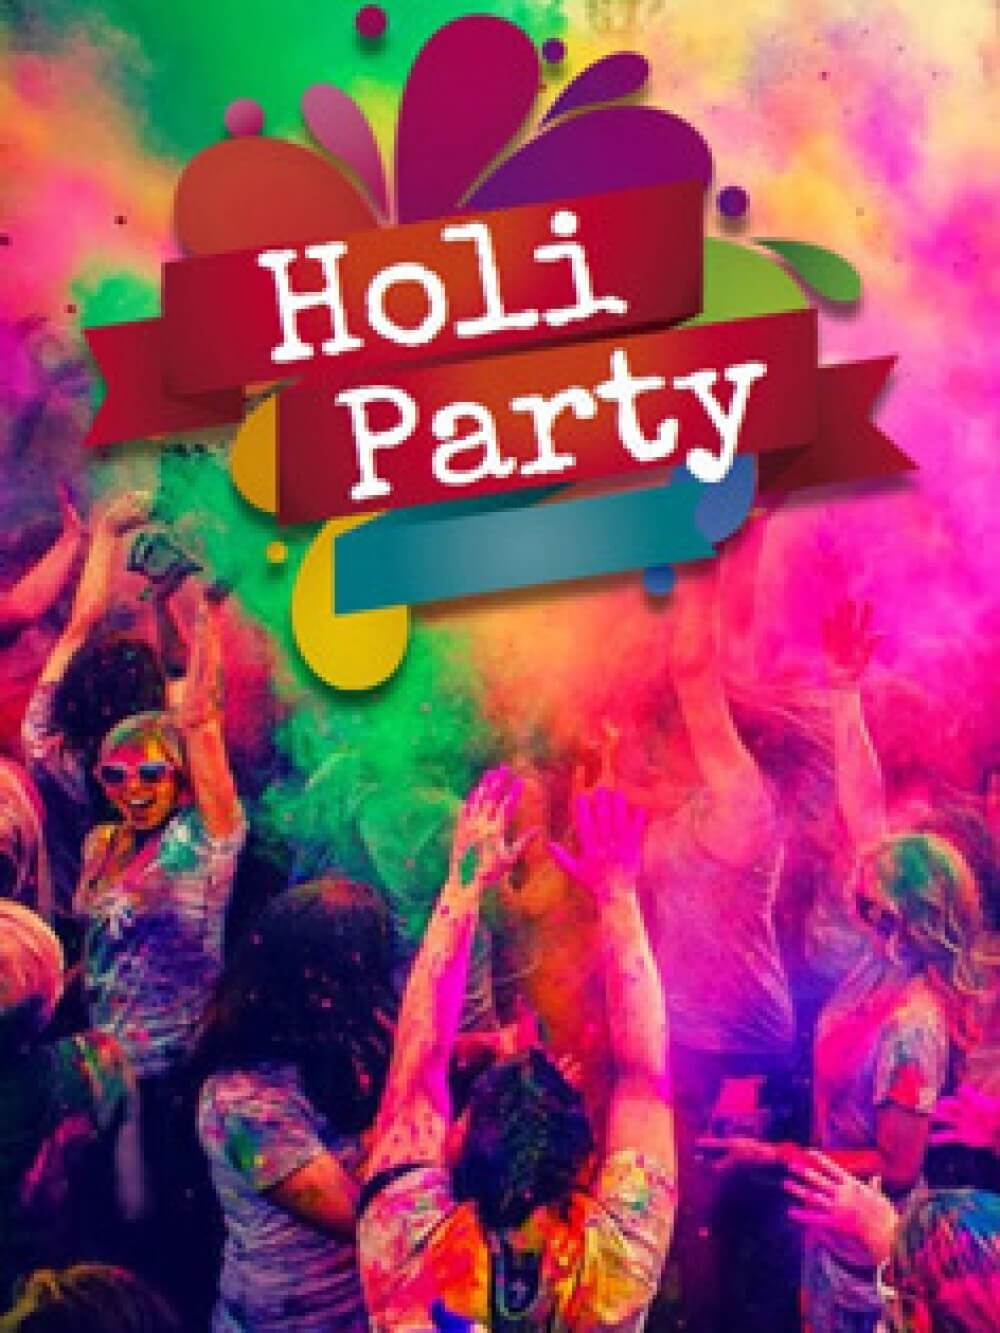 holi_party_vertical_web